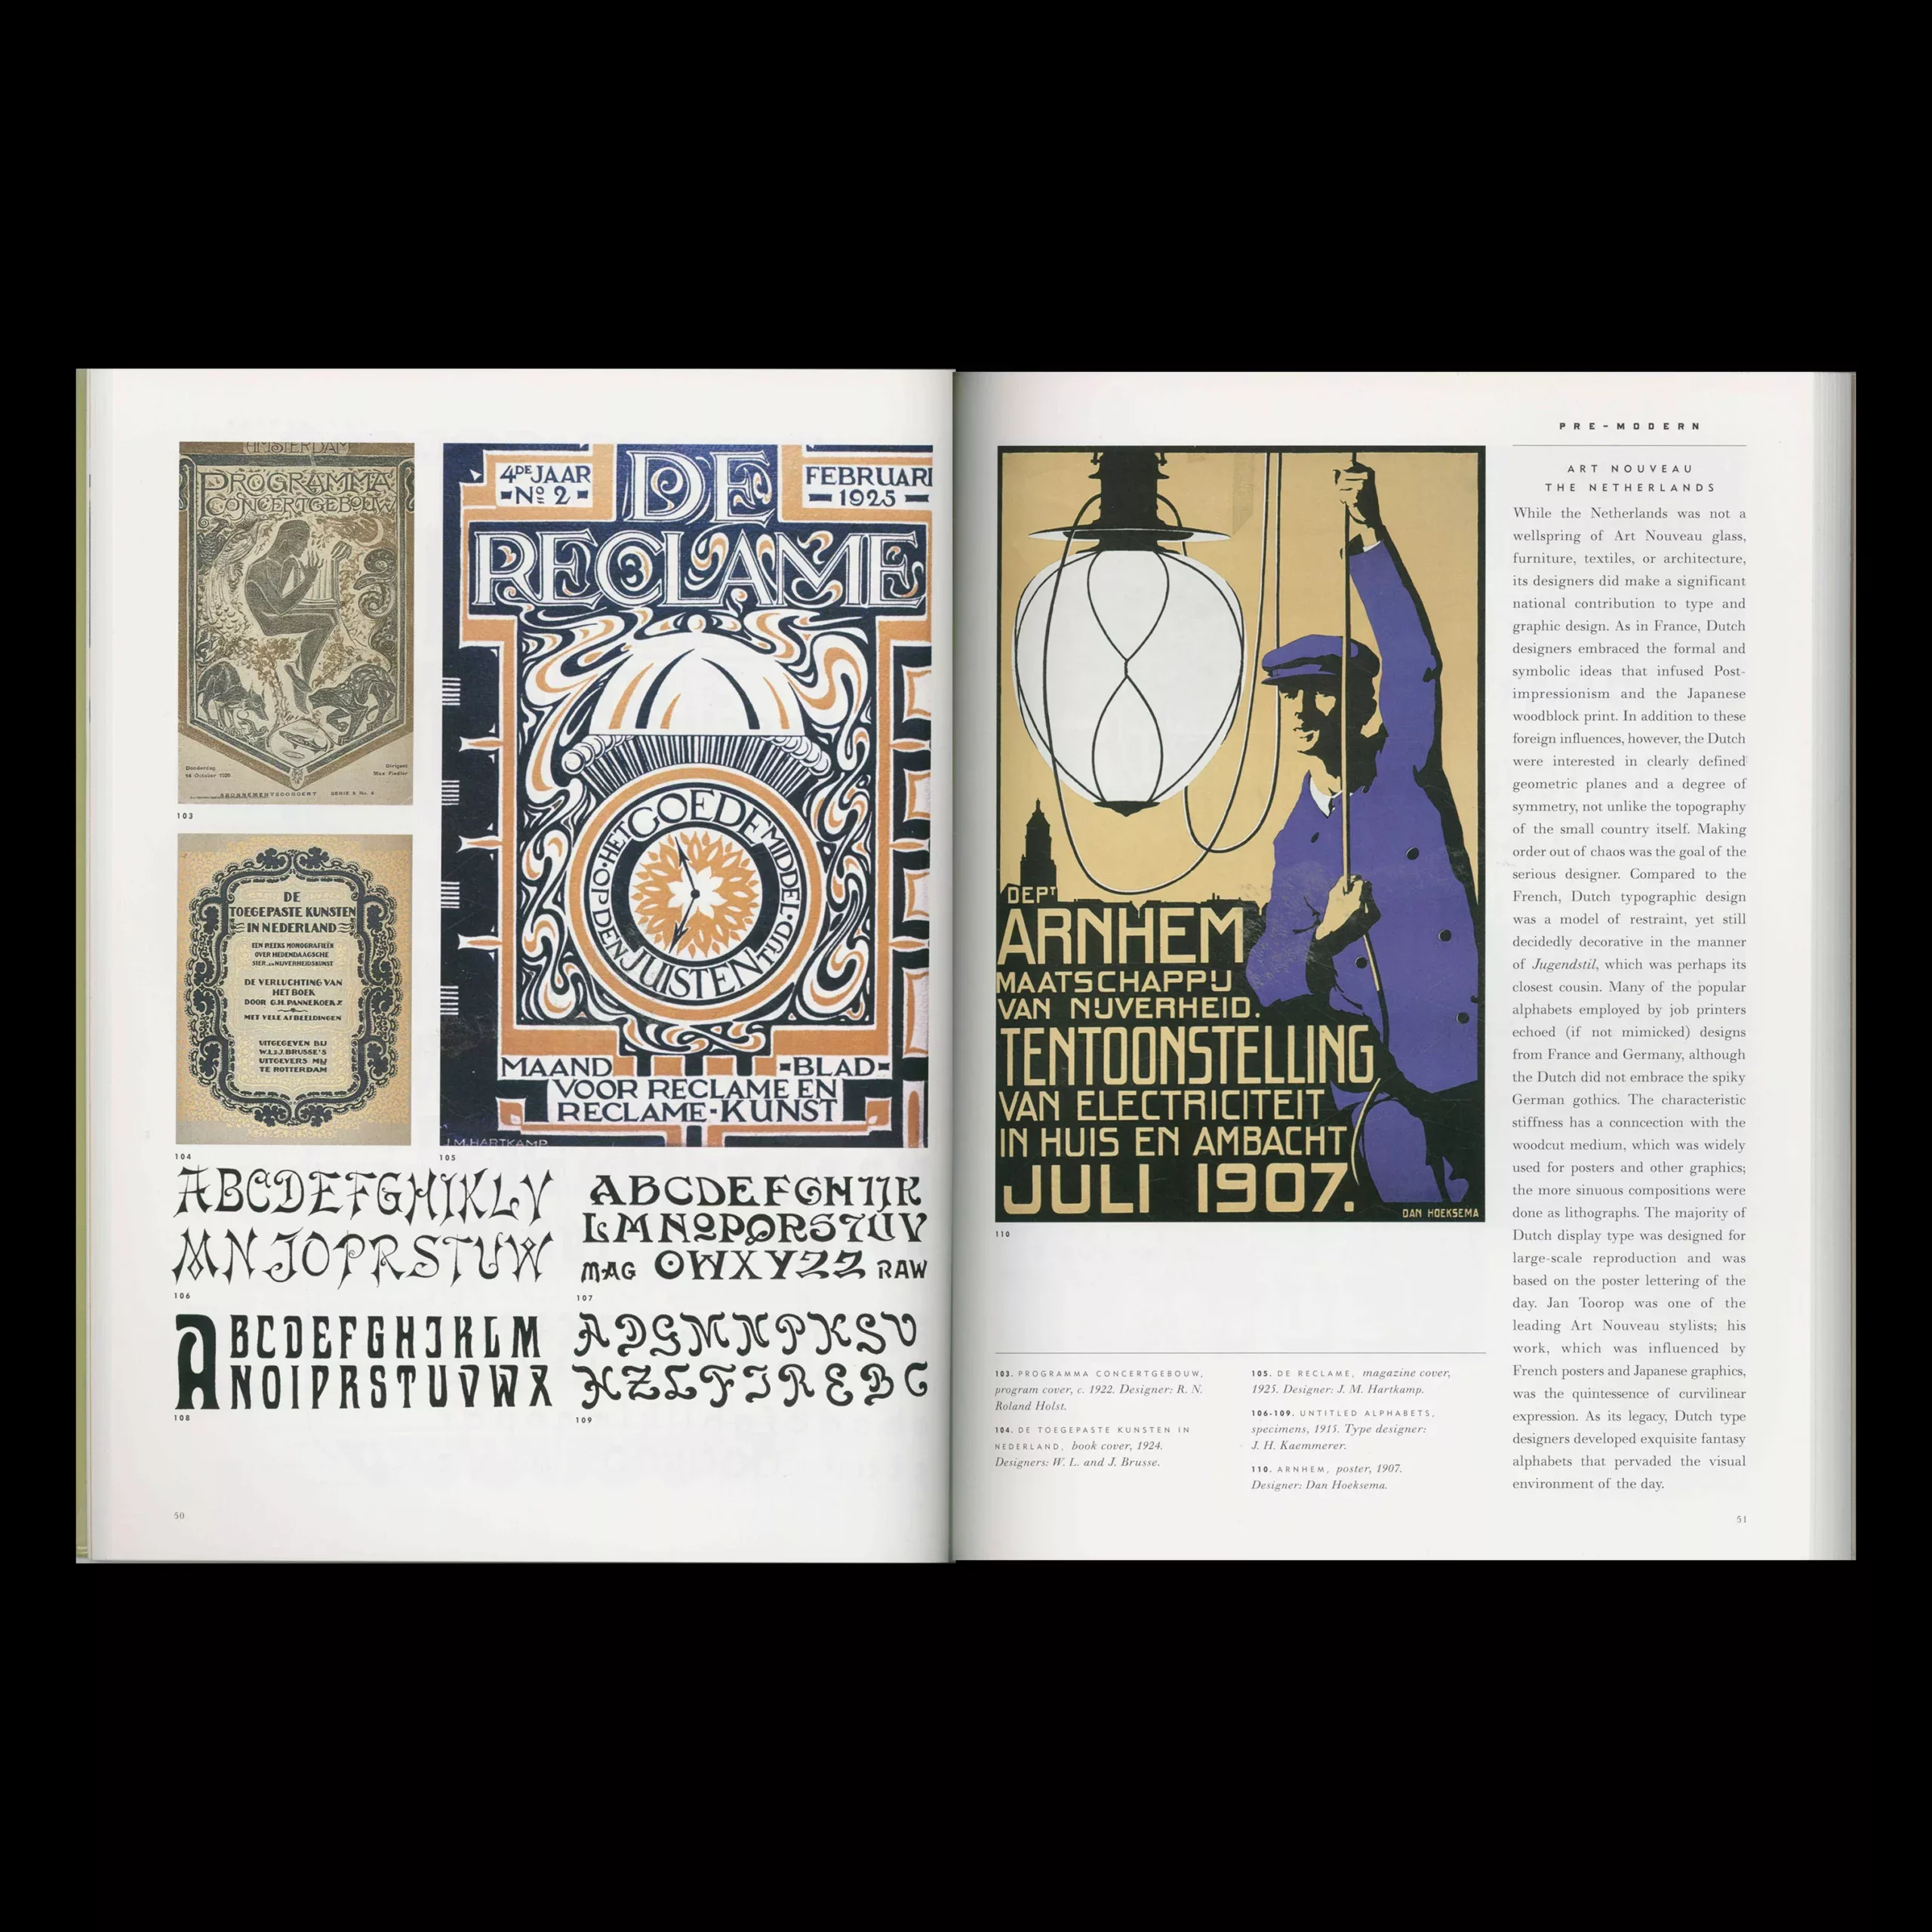 Typology: Type Design from the Victorian Era to the Digital Age, Chronicle Books, 1999